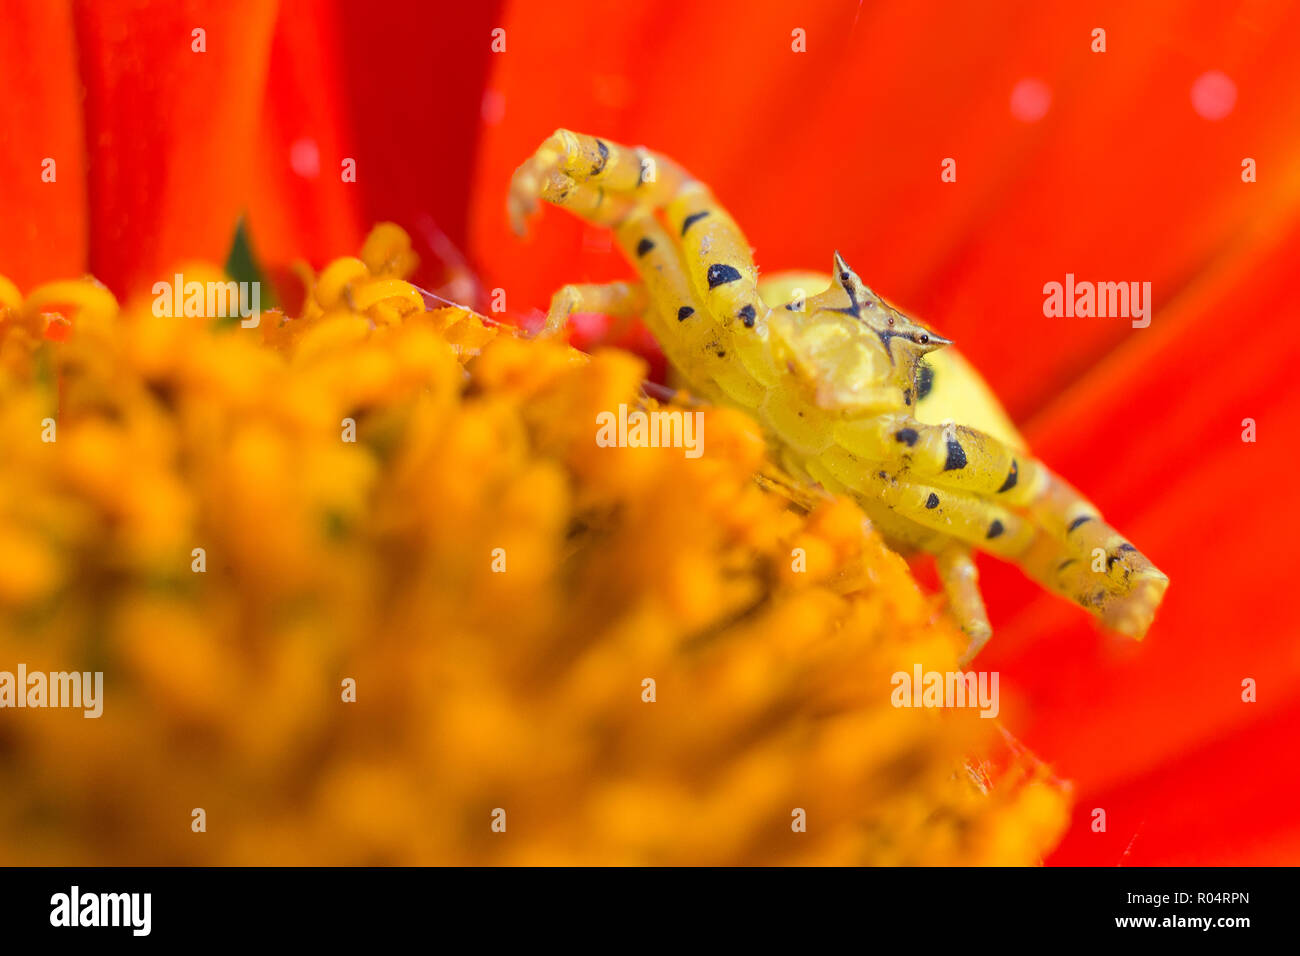 Strange crab spider in flower with an angry face expression Stock Photo